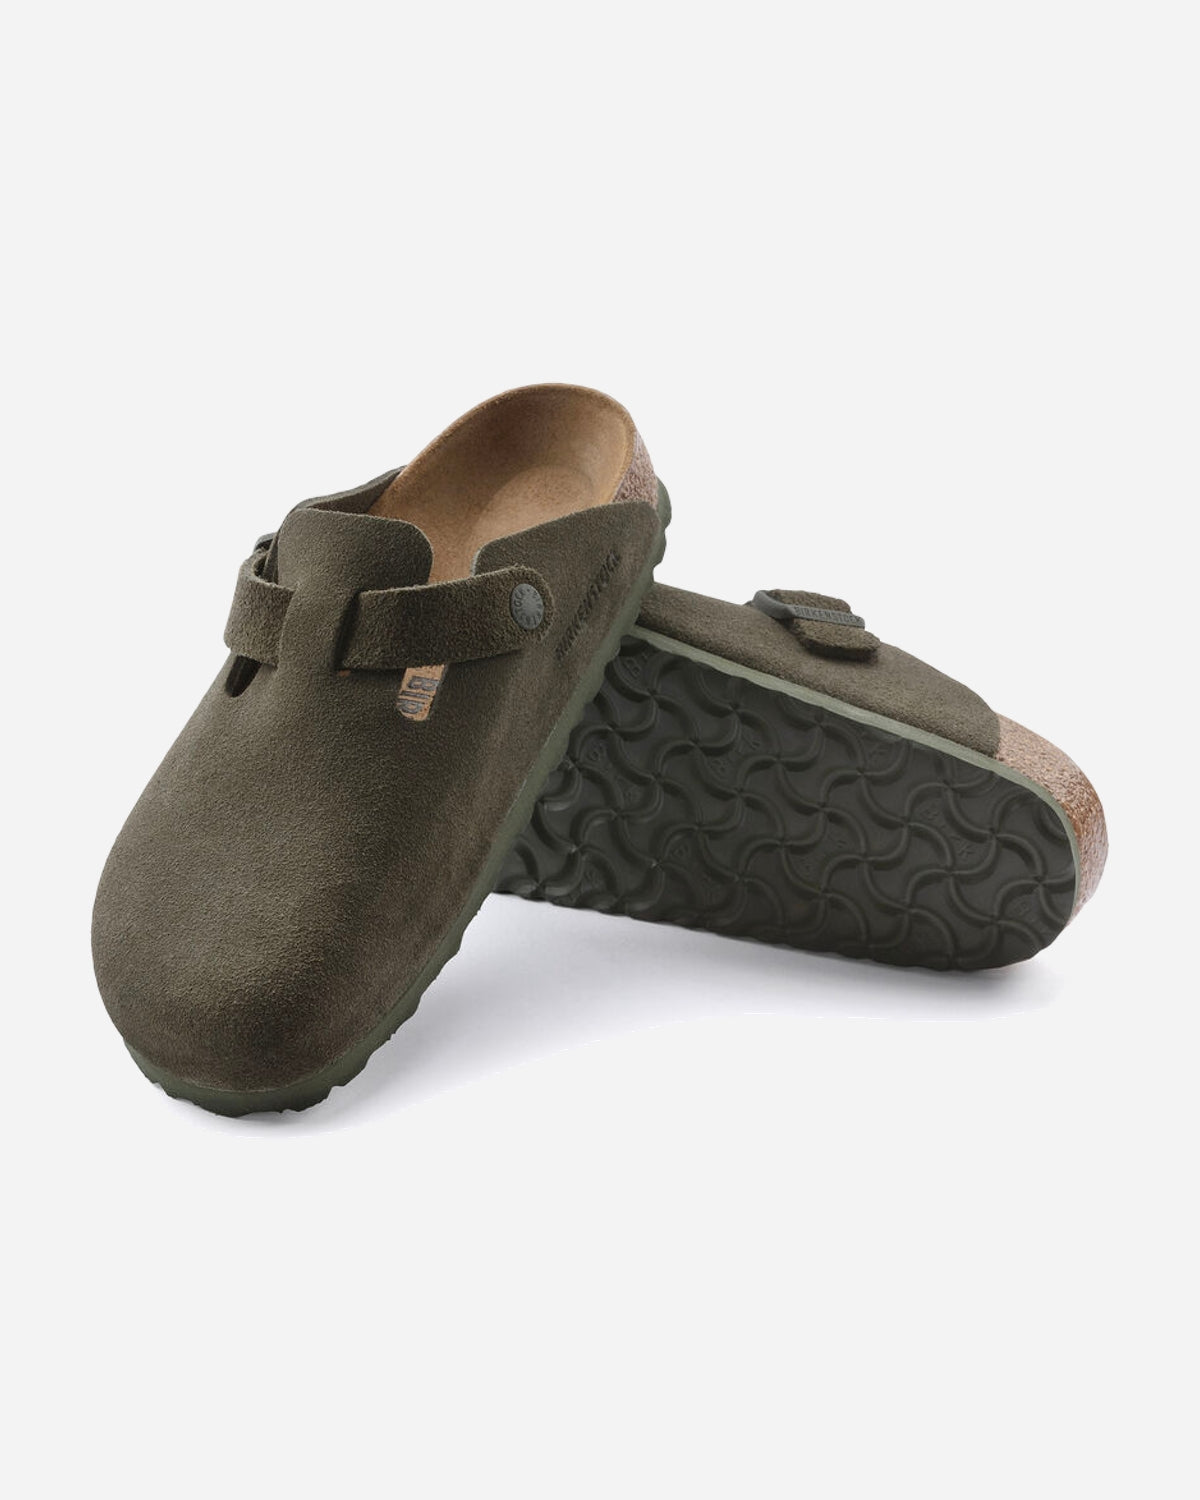 Boston Suede Leather Regular - Thyme